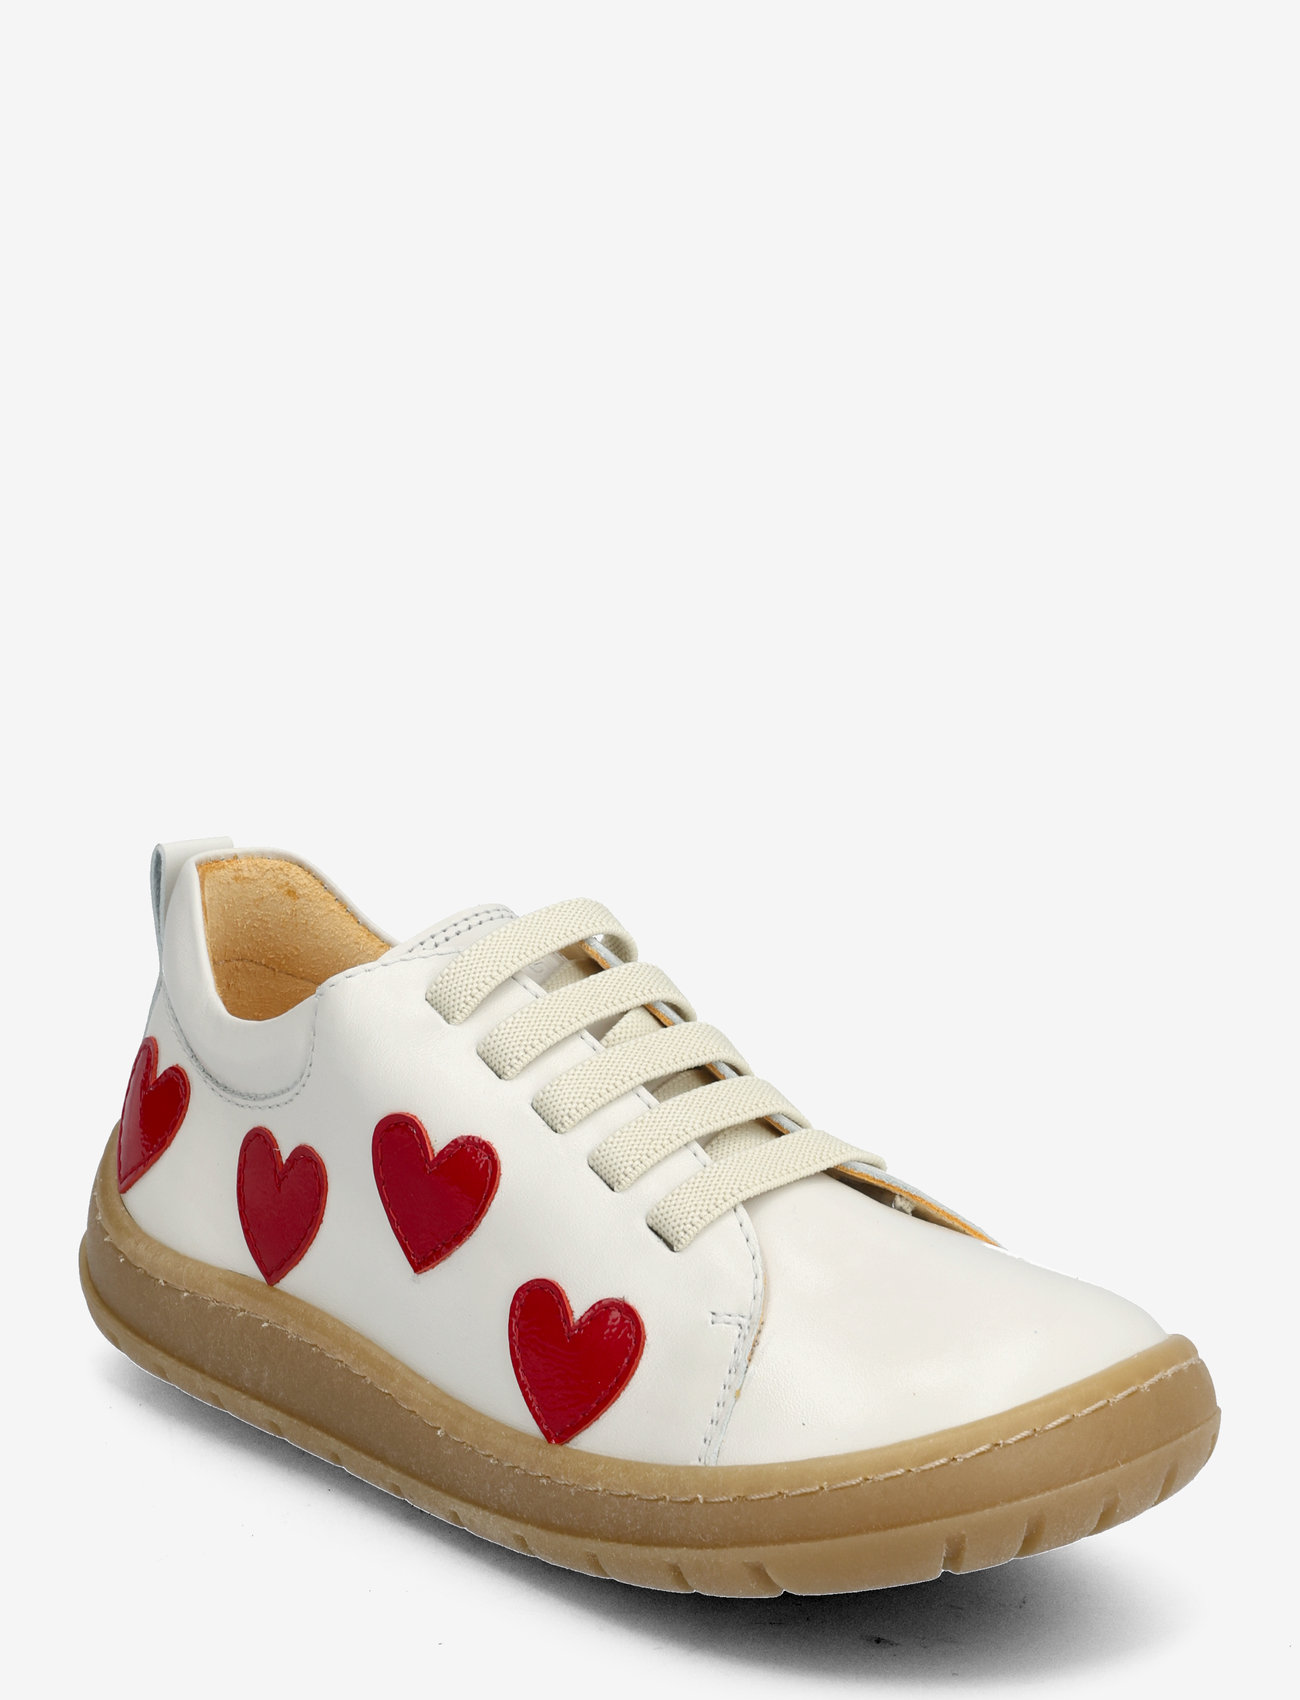 ANGULUS - Shoes - flat - with lace - low tops - 1493/a004 off white/hearts - 0